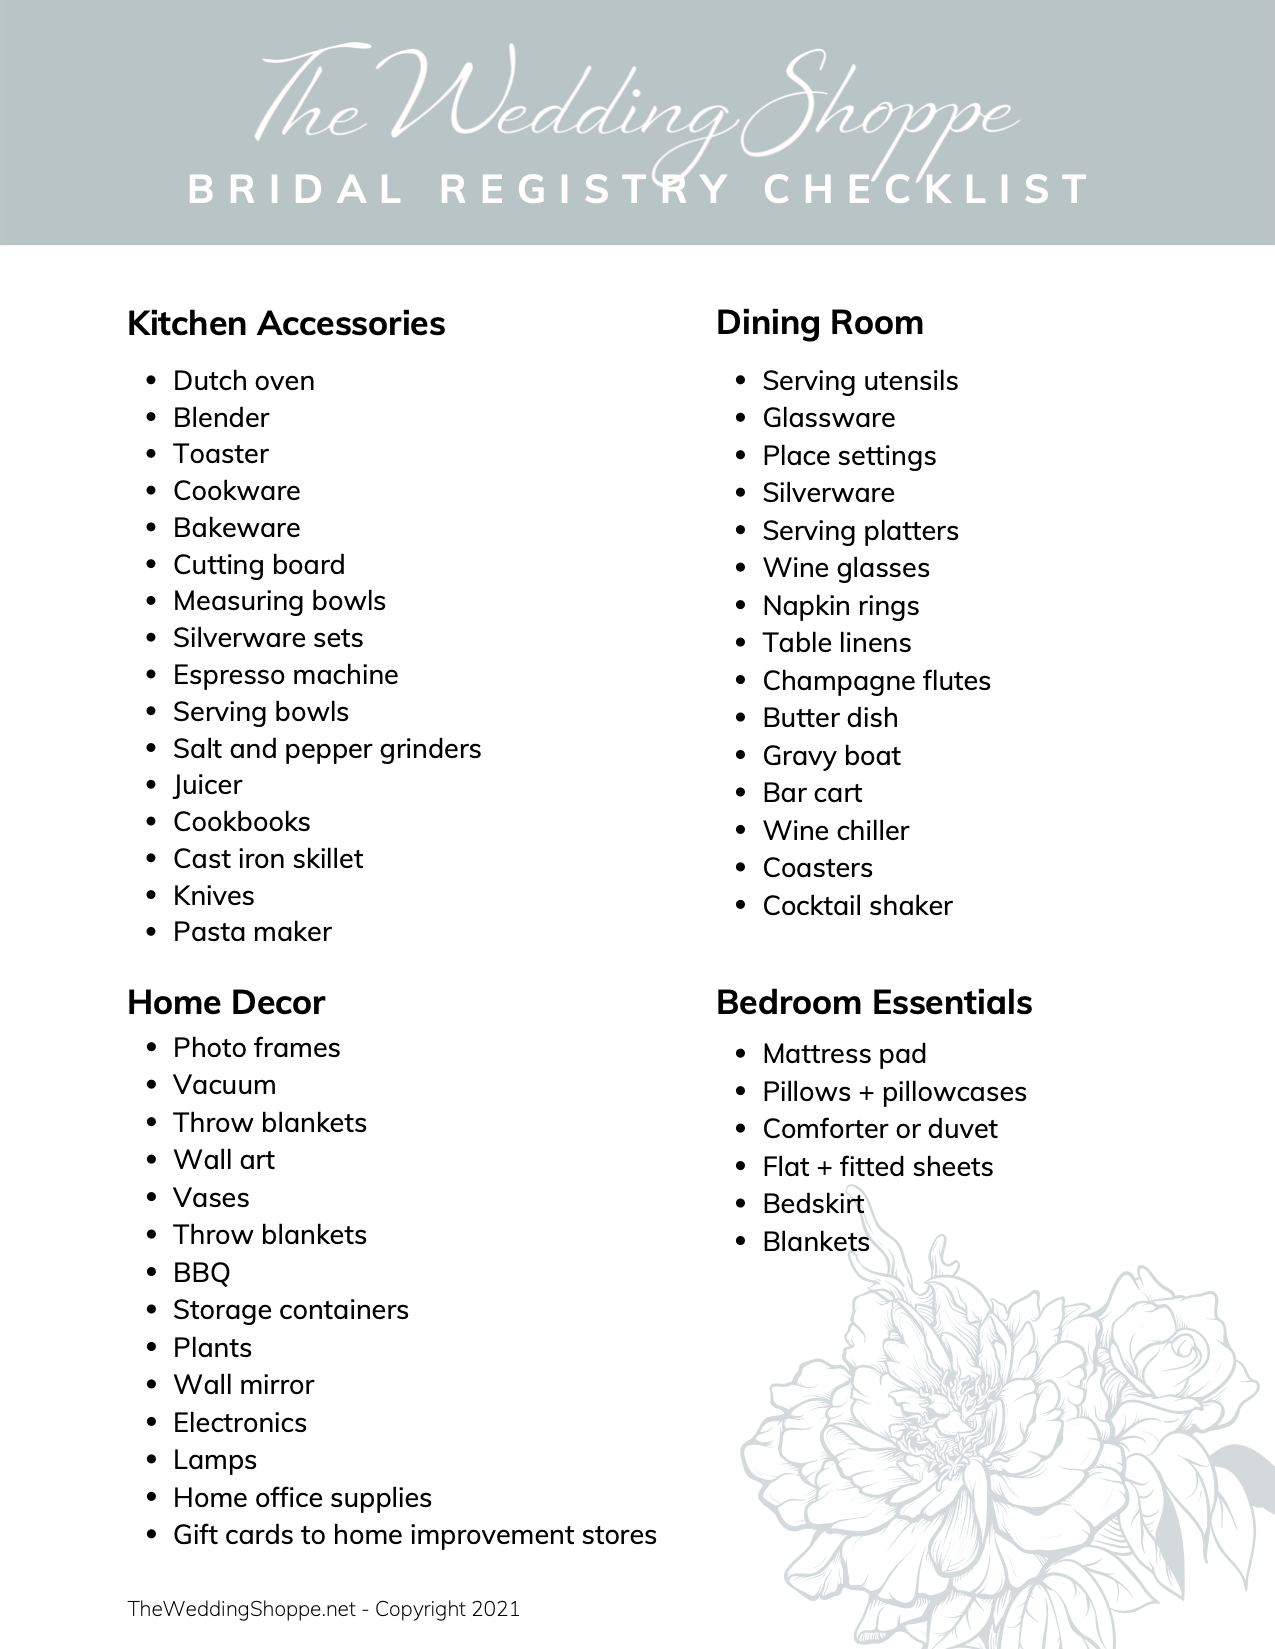 The Ultimate Wedding Registry Checklist for Brides | The Wedding Shoppe